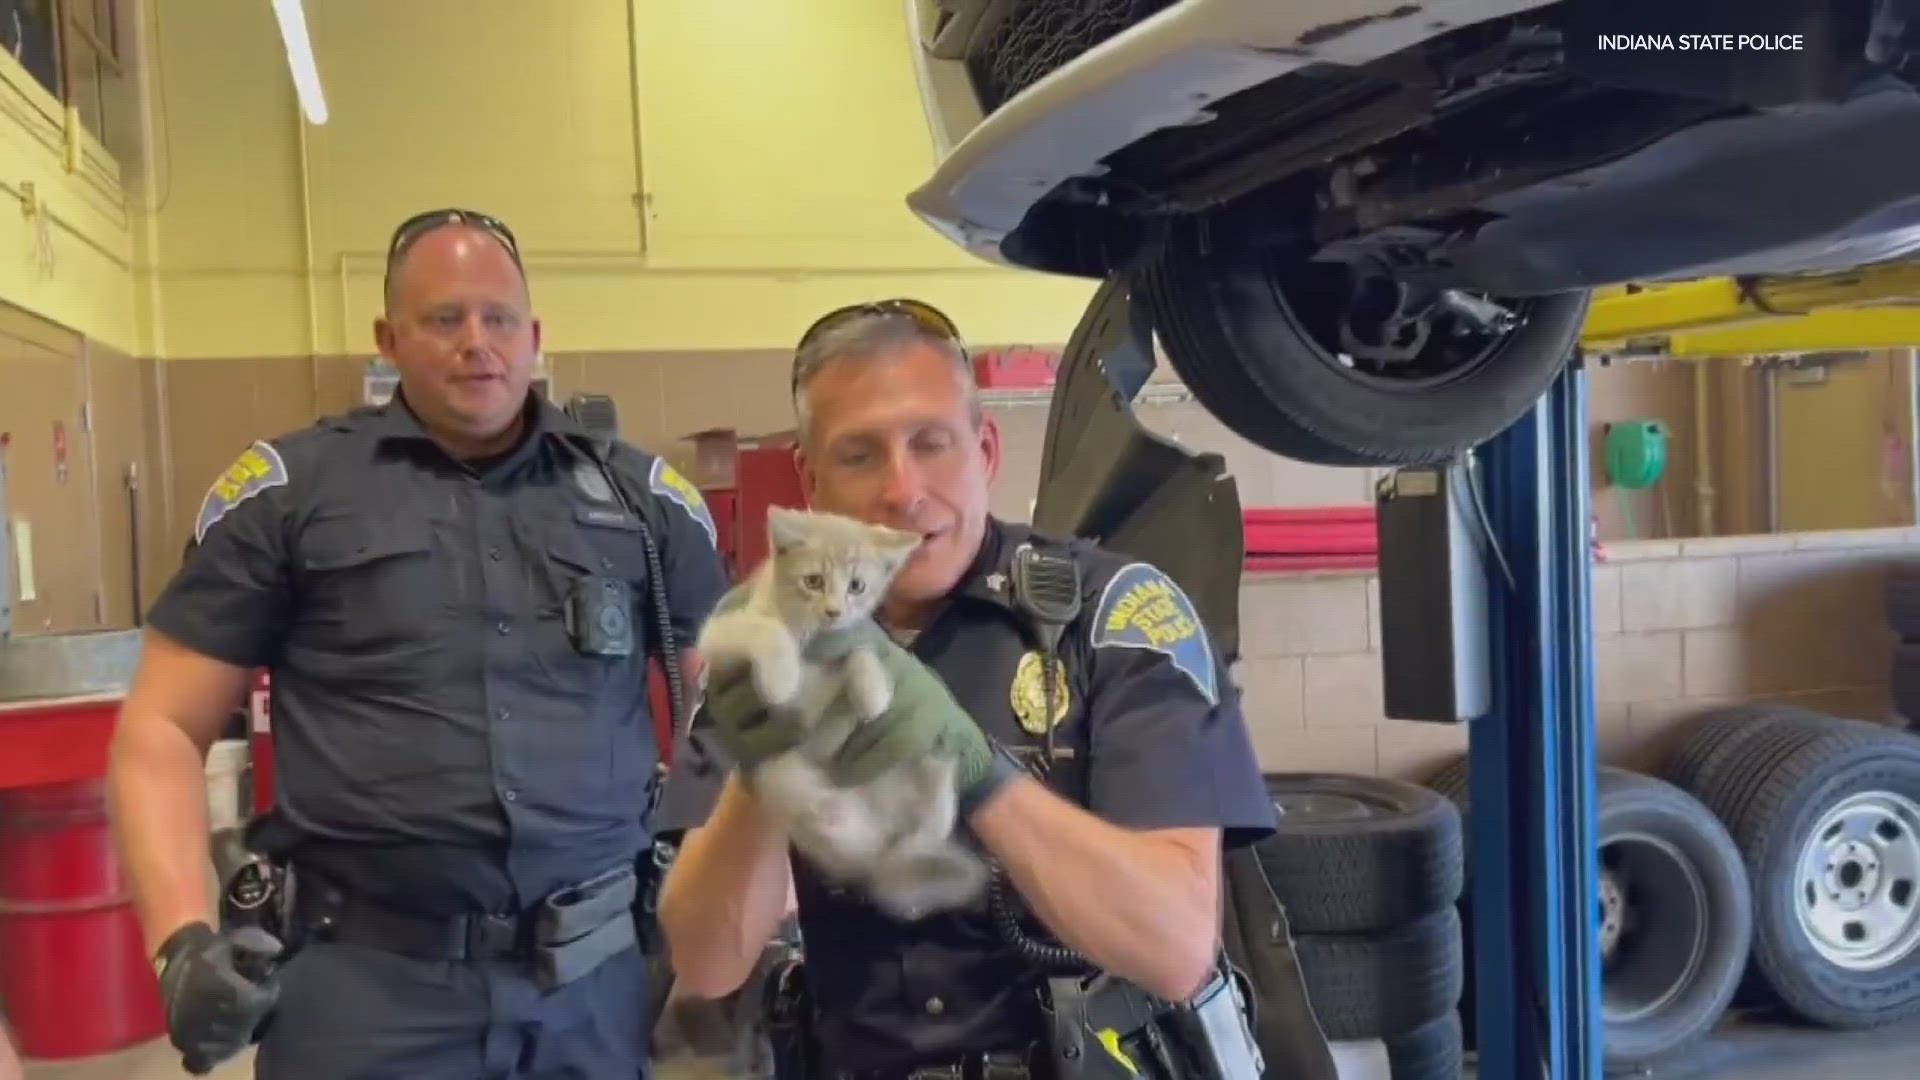 Indiana State Police troopers made a rescue in the garage, pulling a kitten out from under on of their patrol cars.